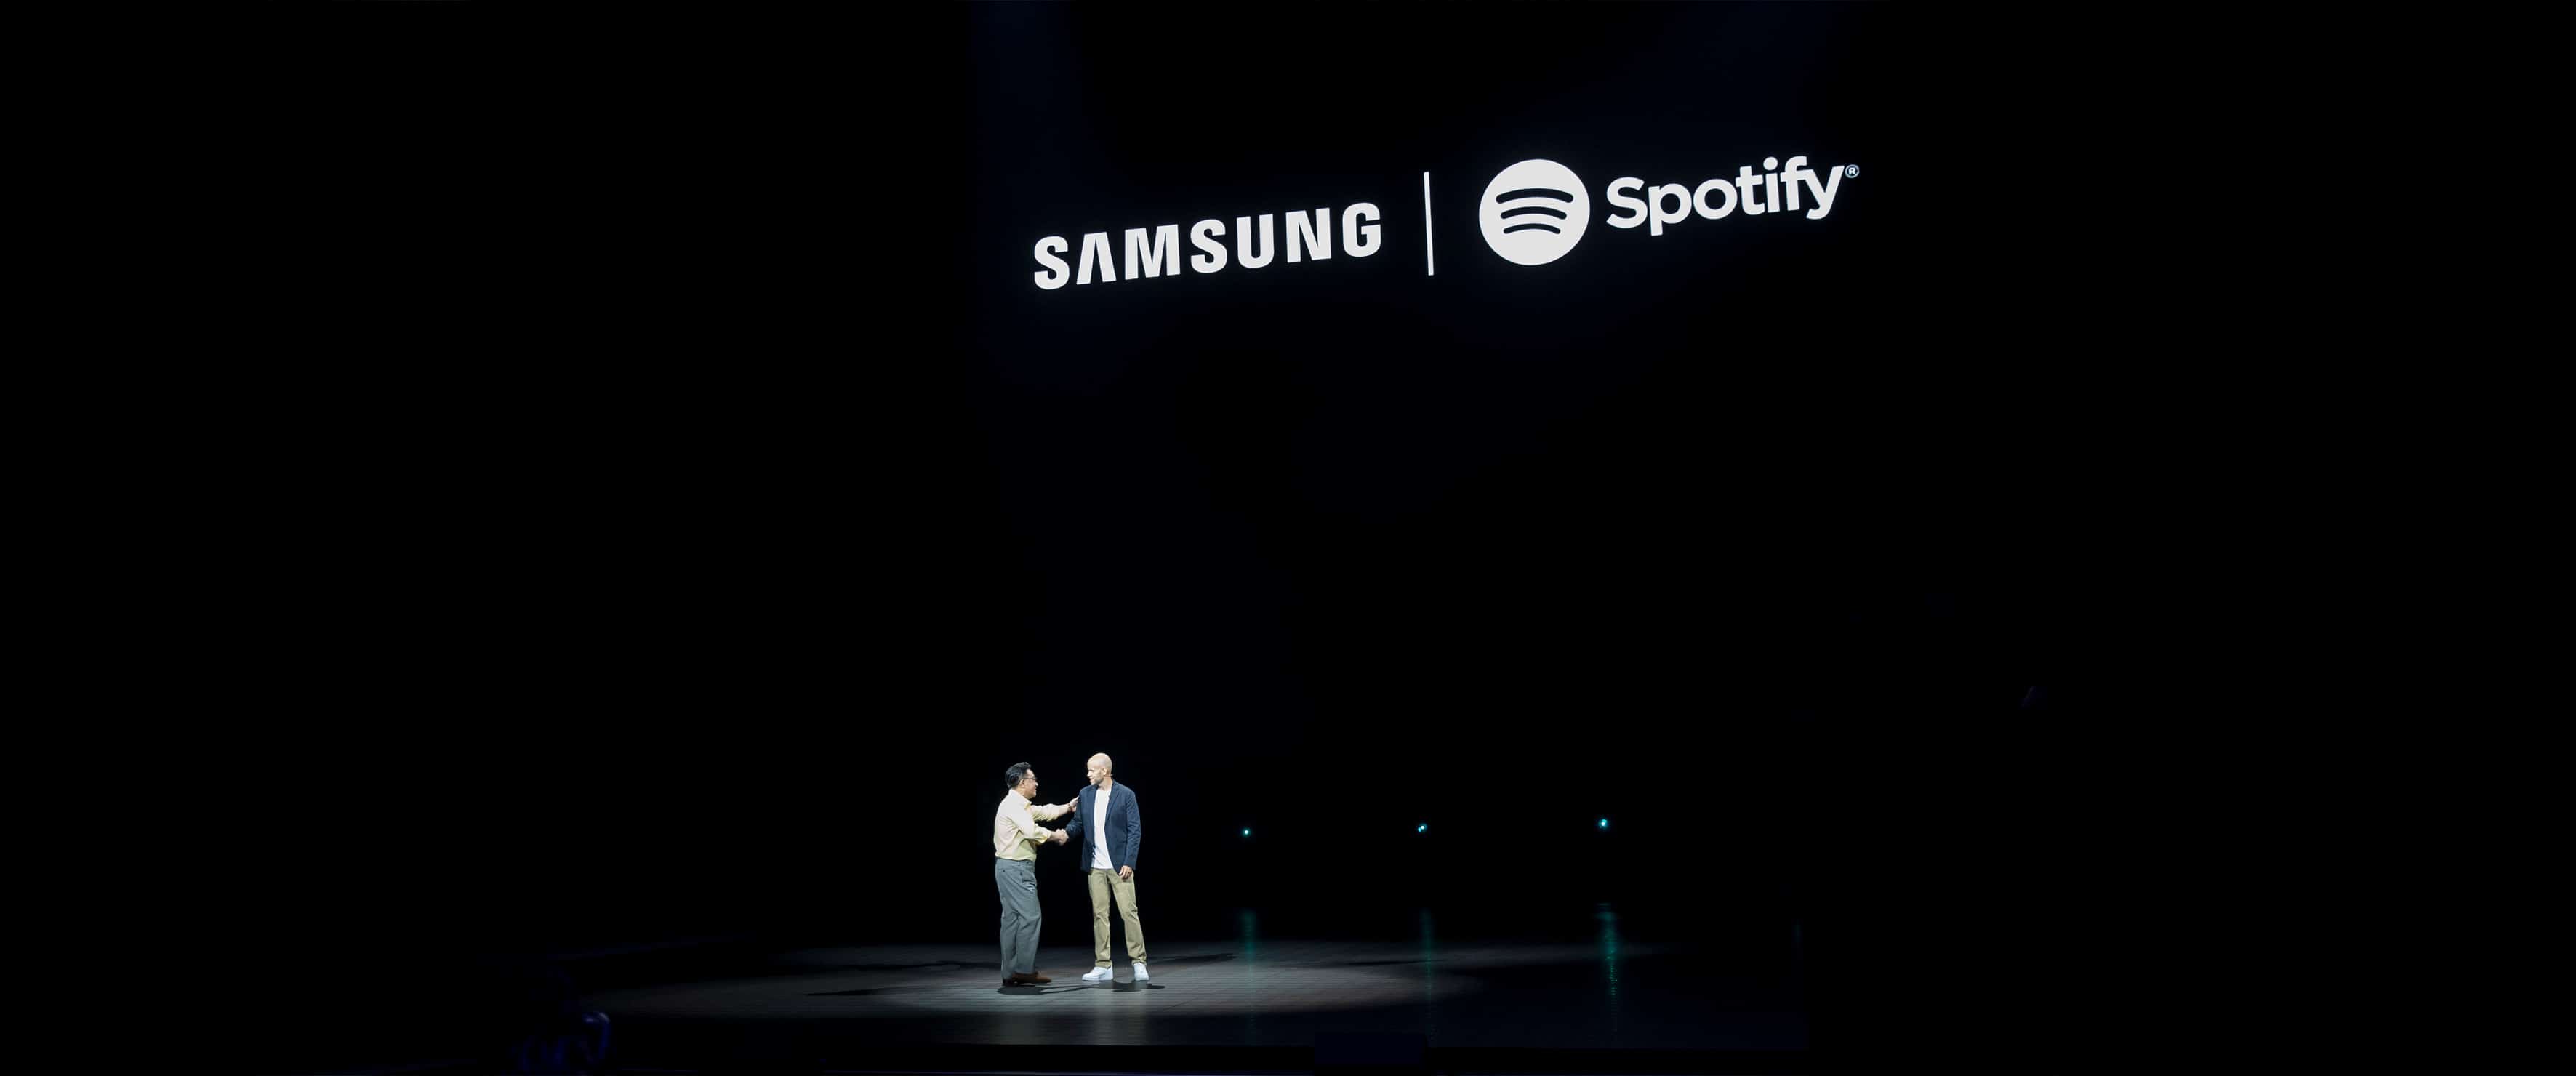 What Samsung and Spotify’s partnership means for you